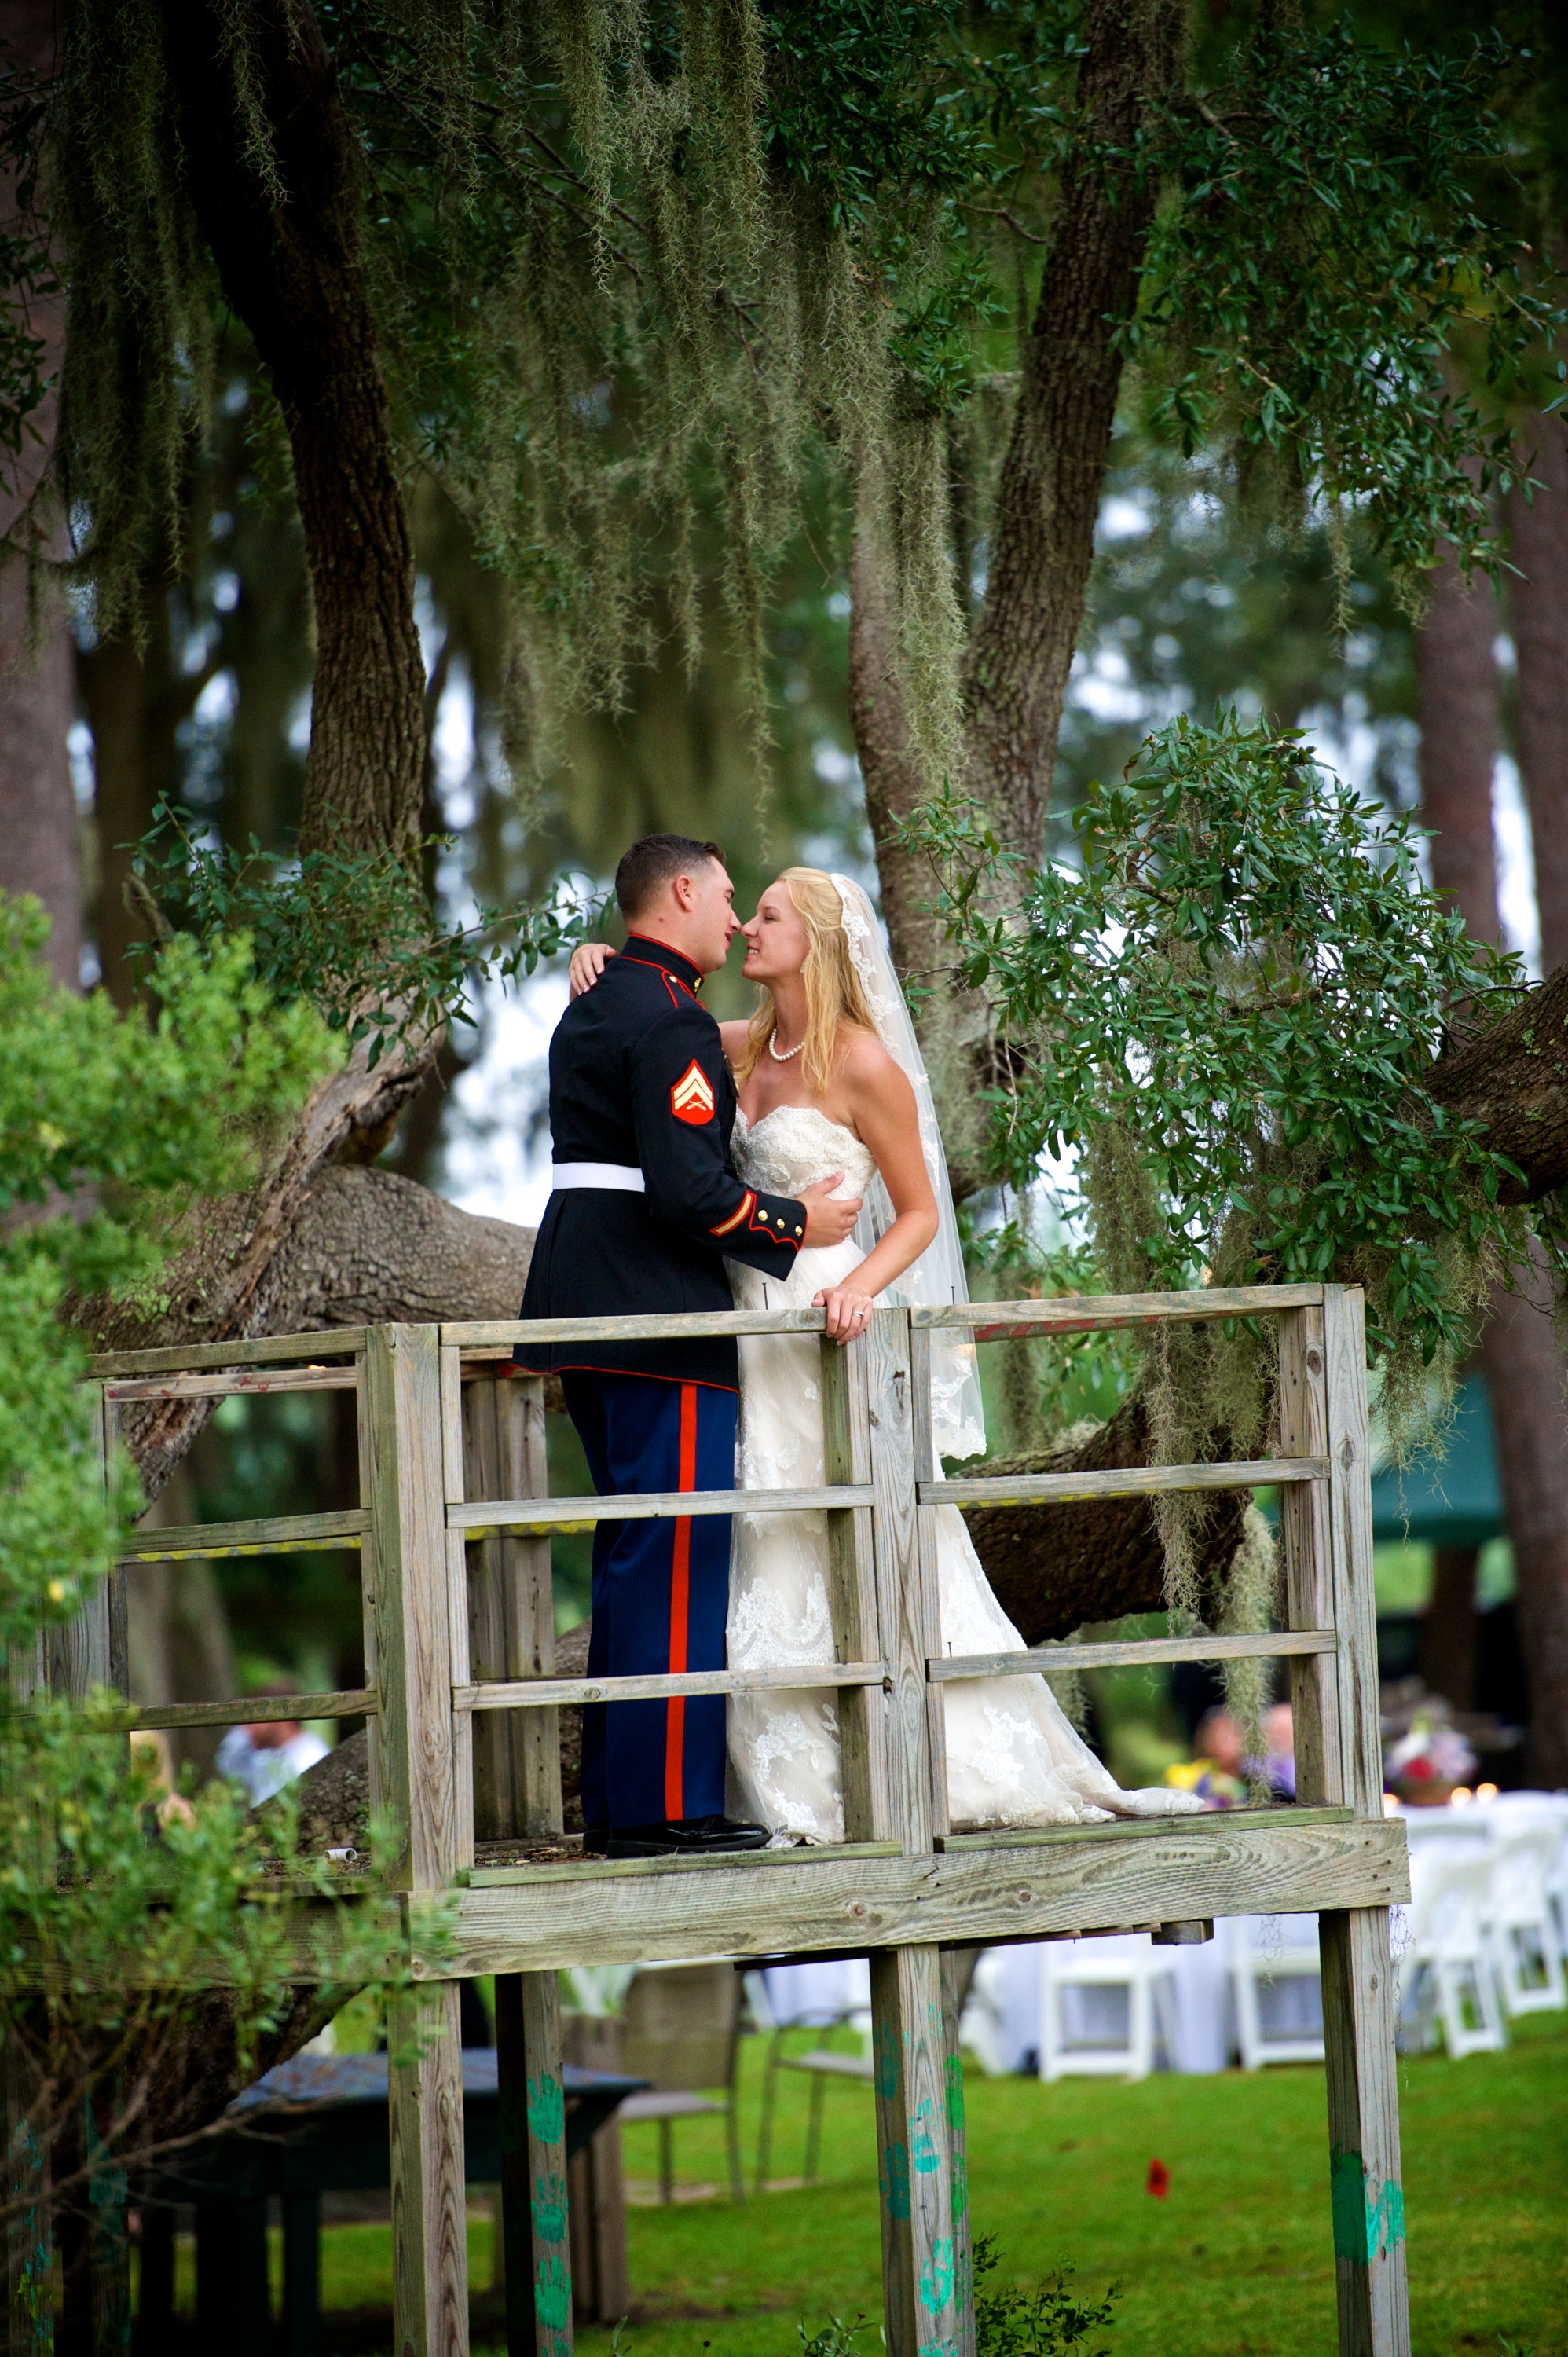  Lauren and Alex's Wedding in Bluffton, SC on the May River 